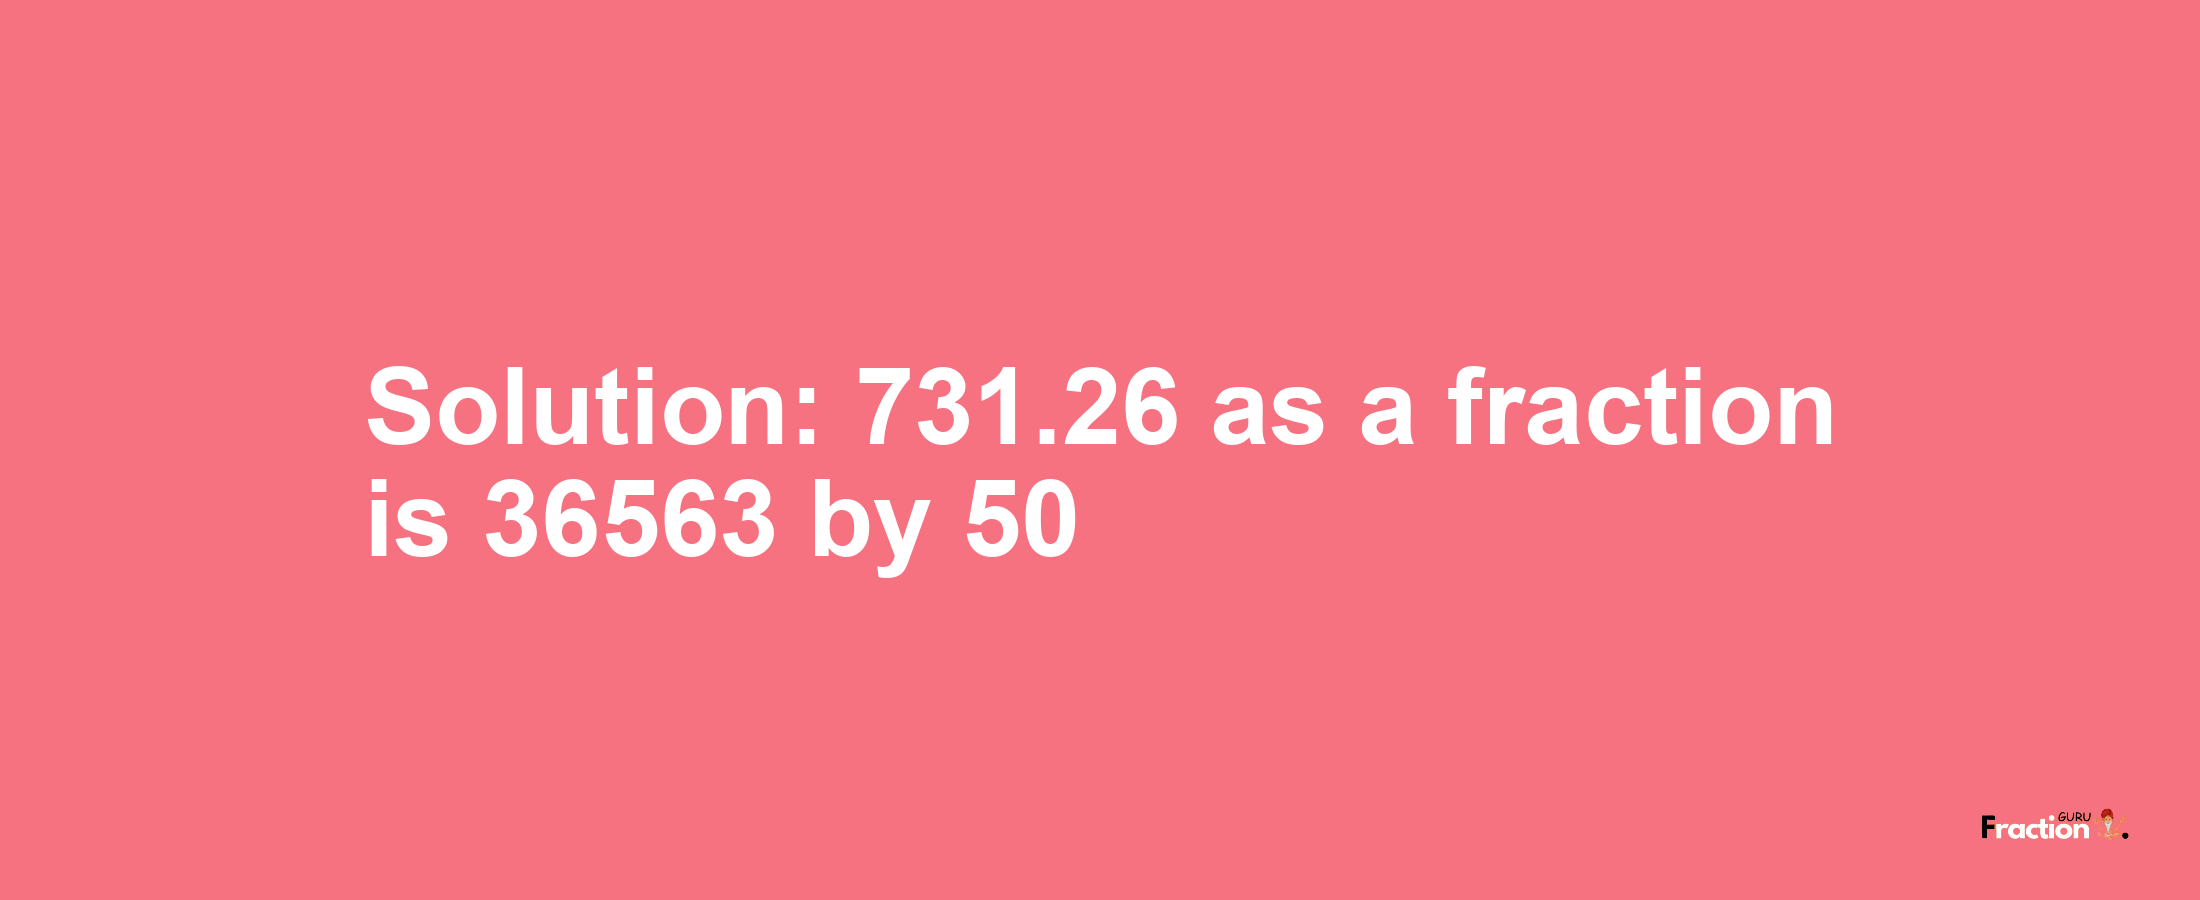 Solution:731.26 as a fraction is 36563/50